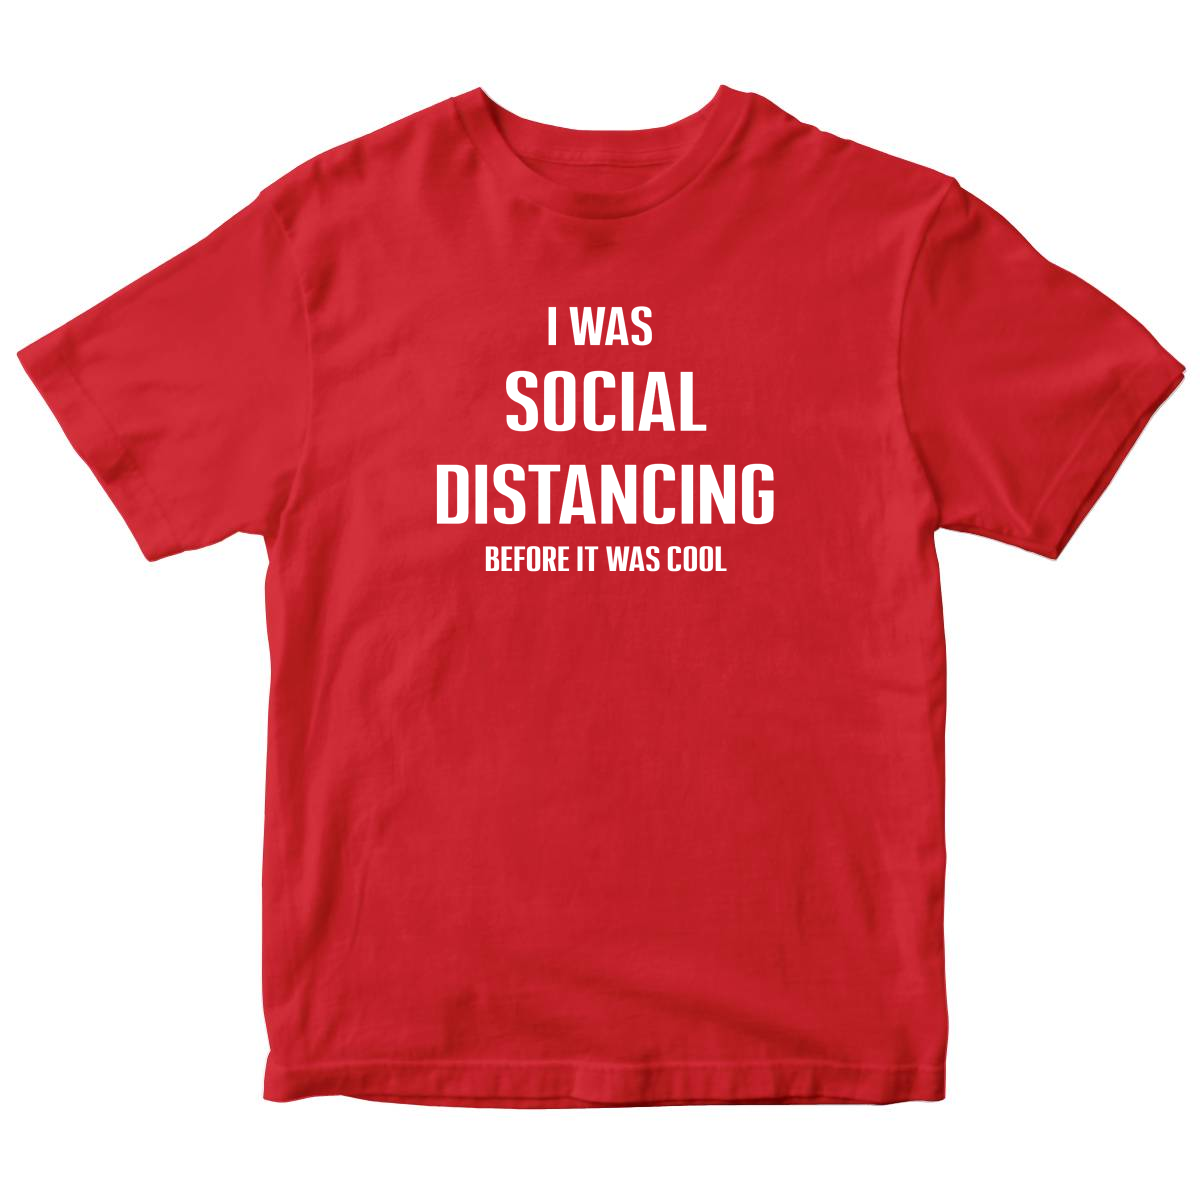 I was social distancing before it was cool Kids T-shirt | Red